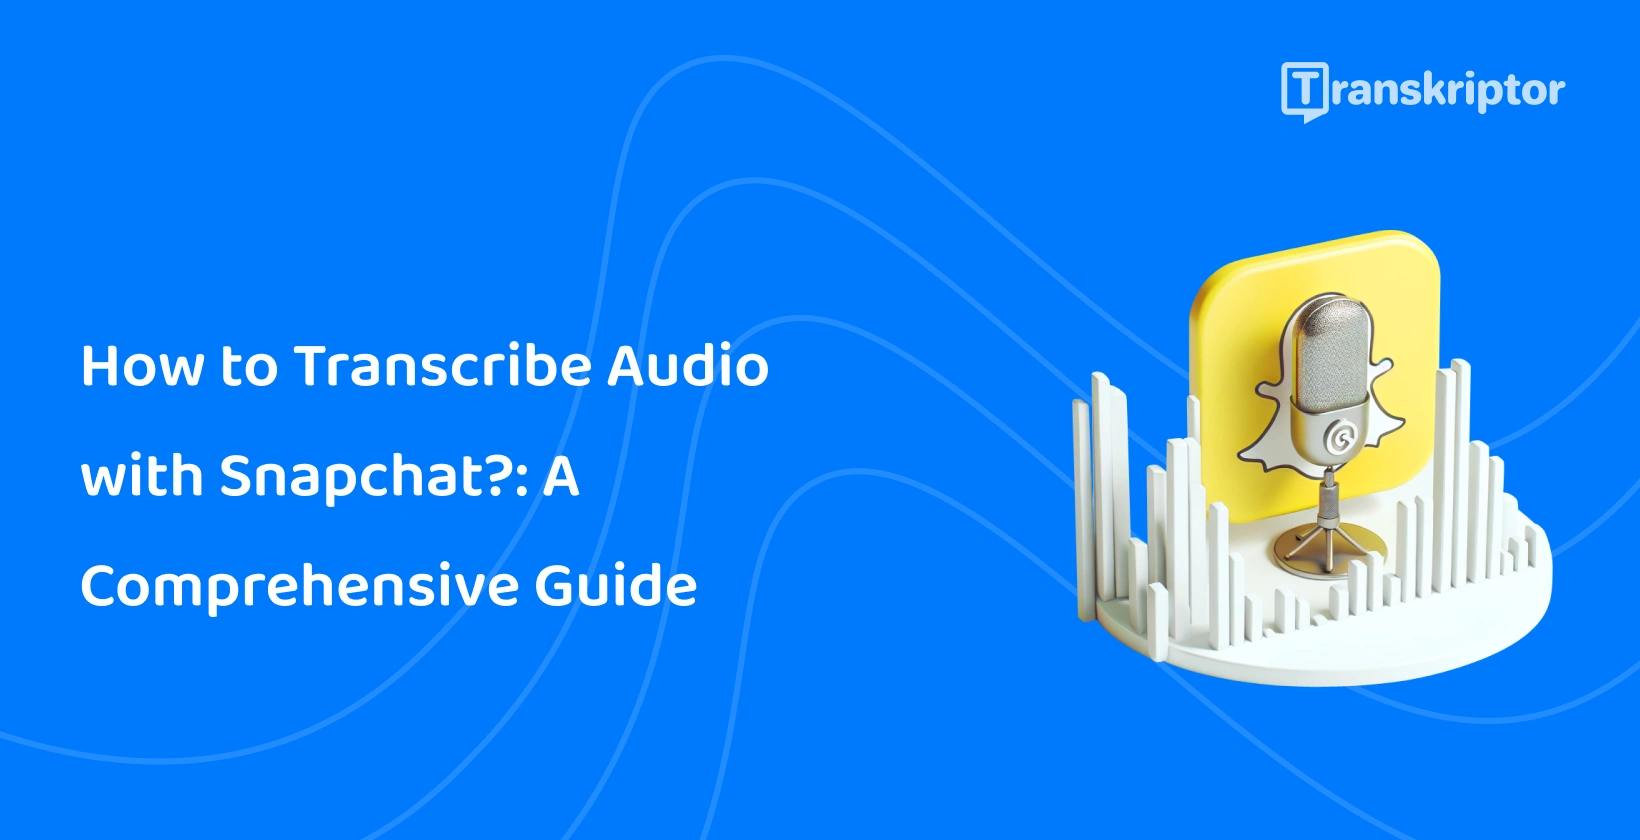 Snapchat ghost and microphone icon symbolizing audio transcription guide by Transkriptor.